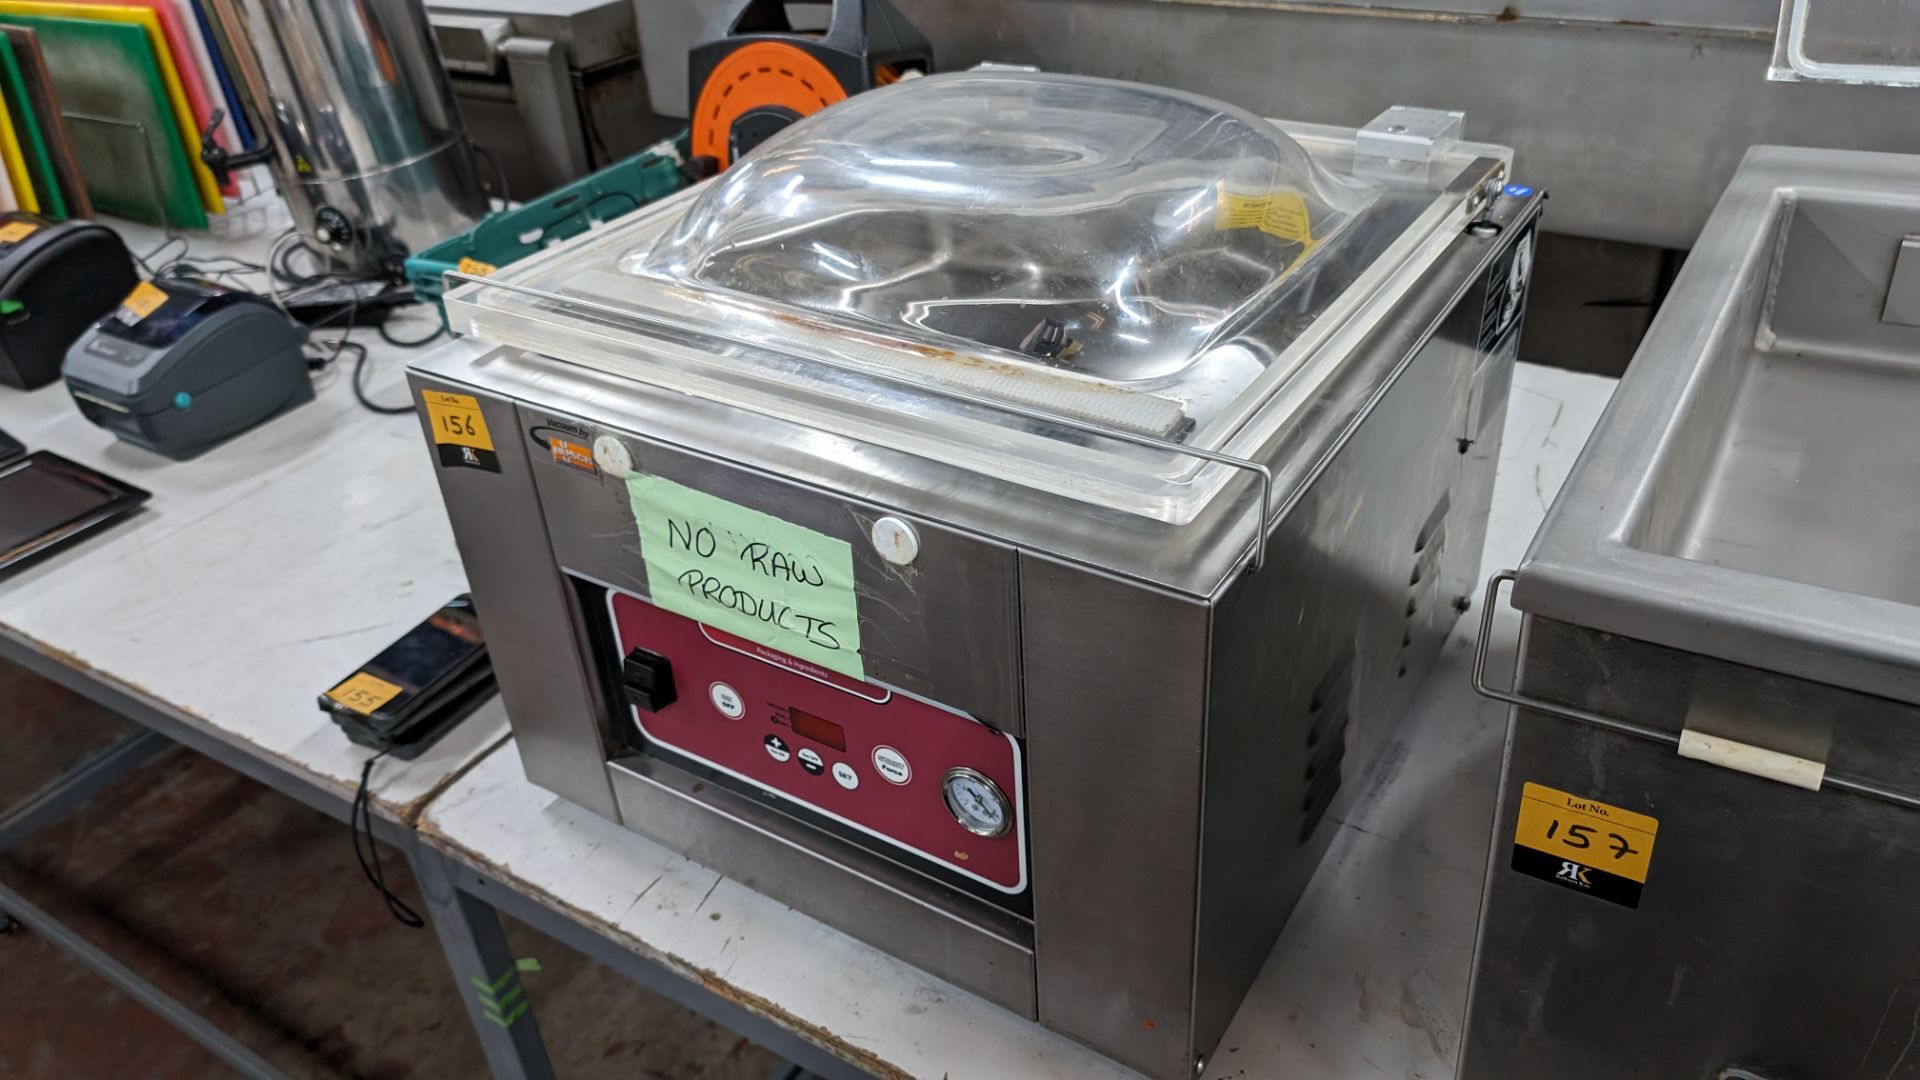 Parkers Food Machinery Plus benchtop stainless steel vacuum chamber machine, model Square 400 - Image 4 of 9